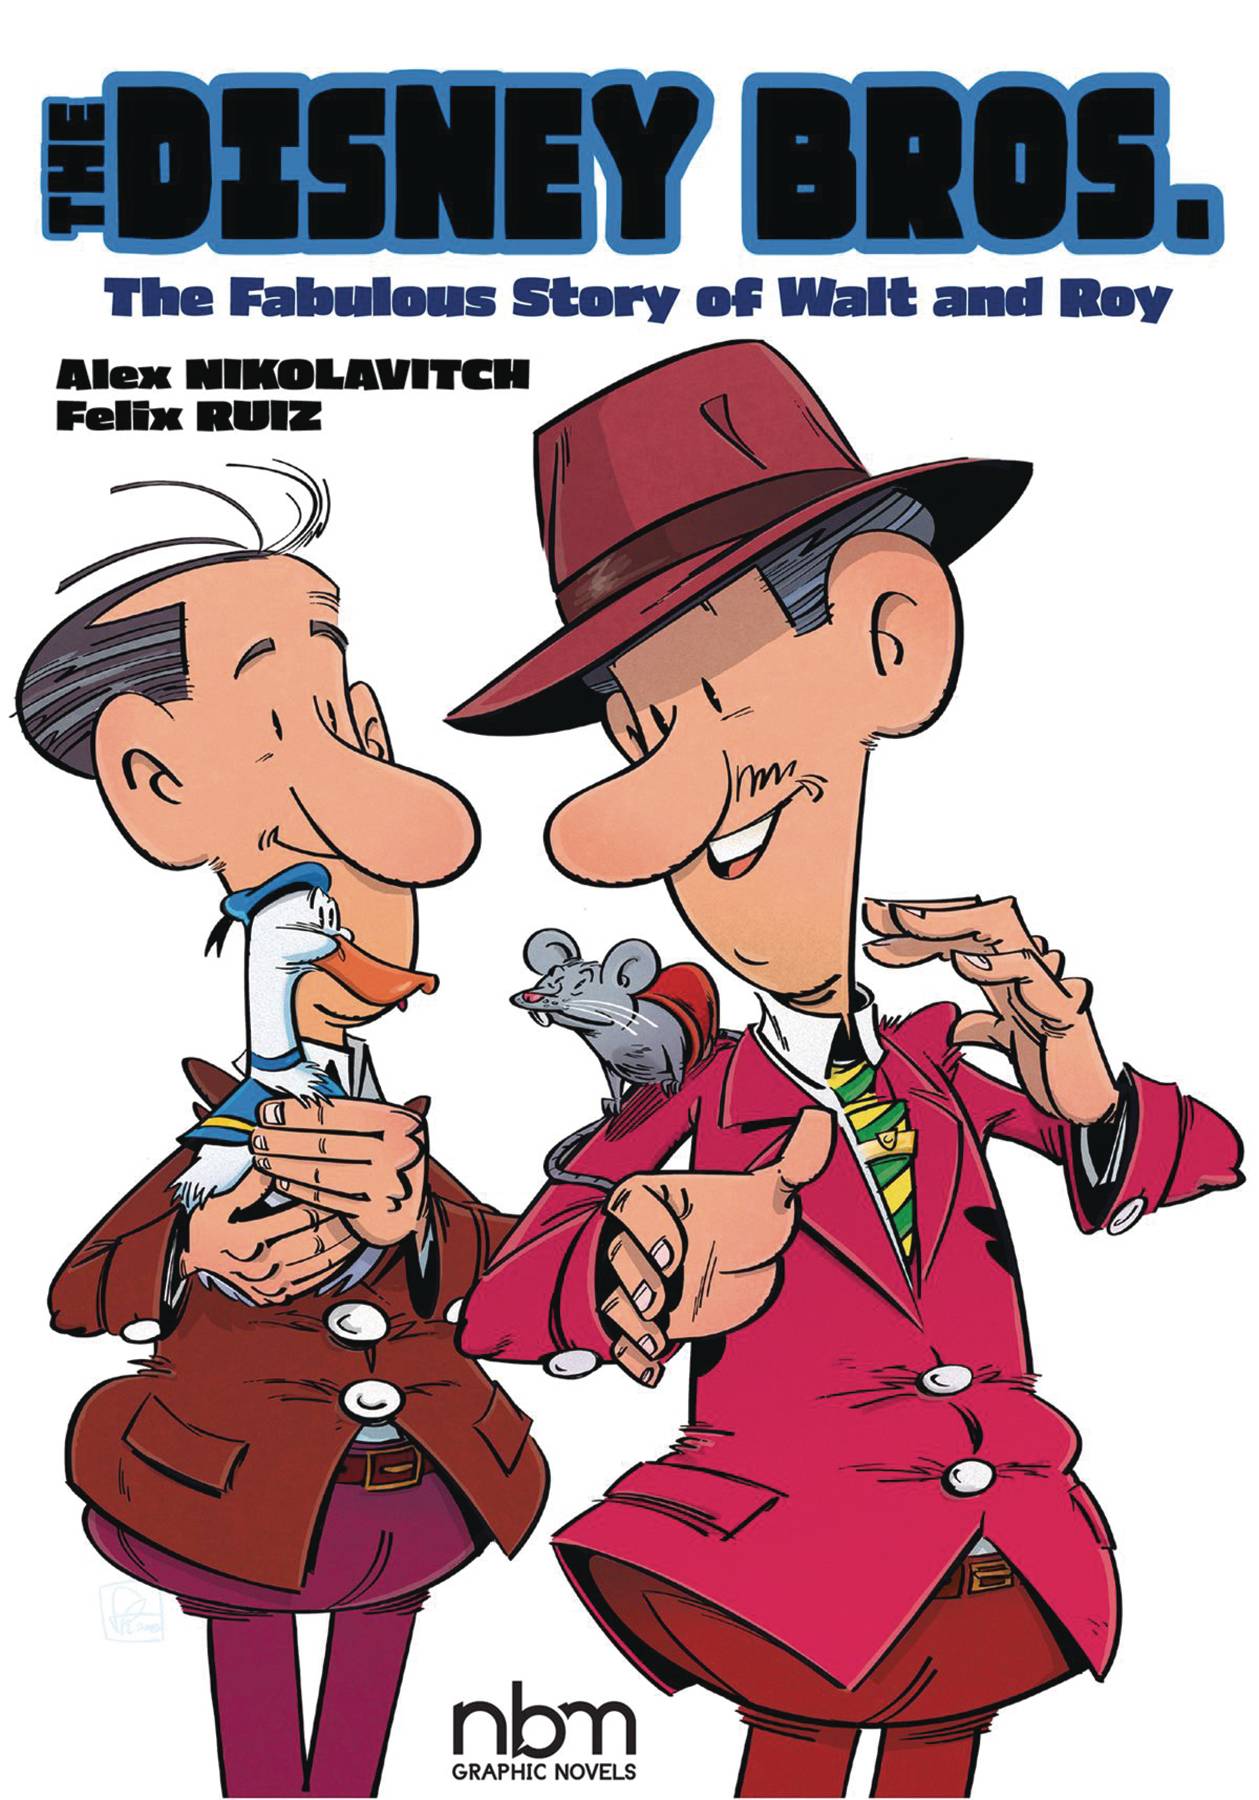 DISNEY BROS FABULOUS STORY OF WALT AND ROY TP